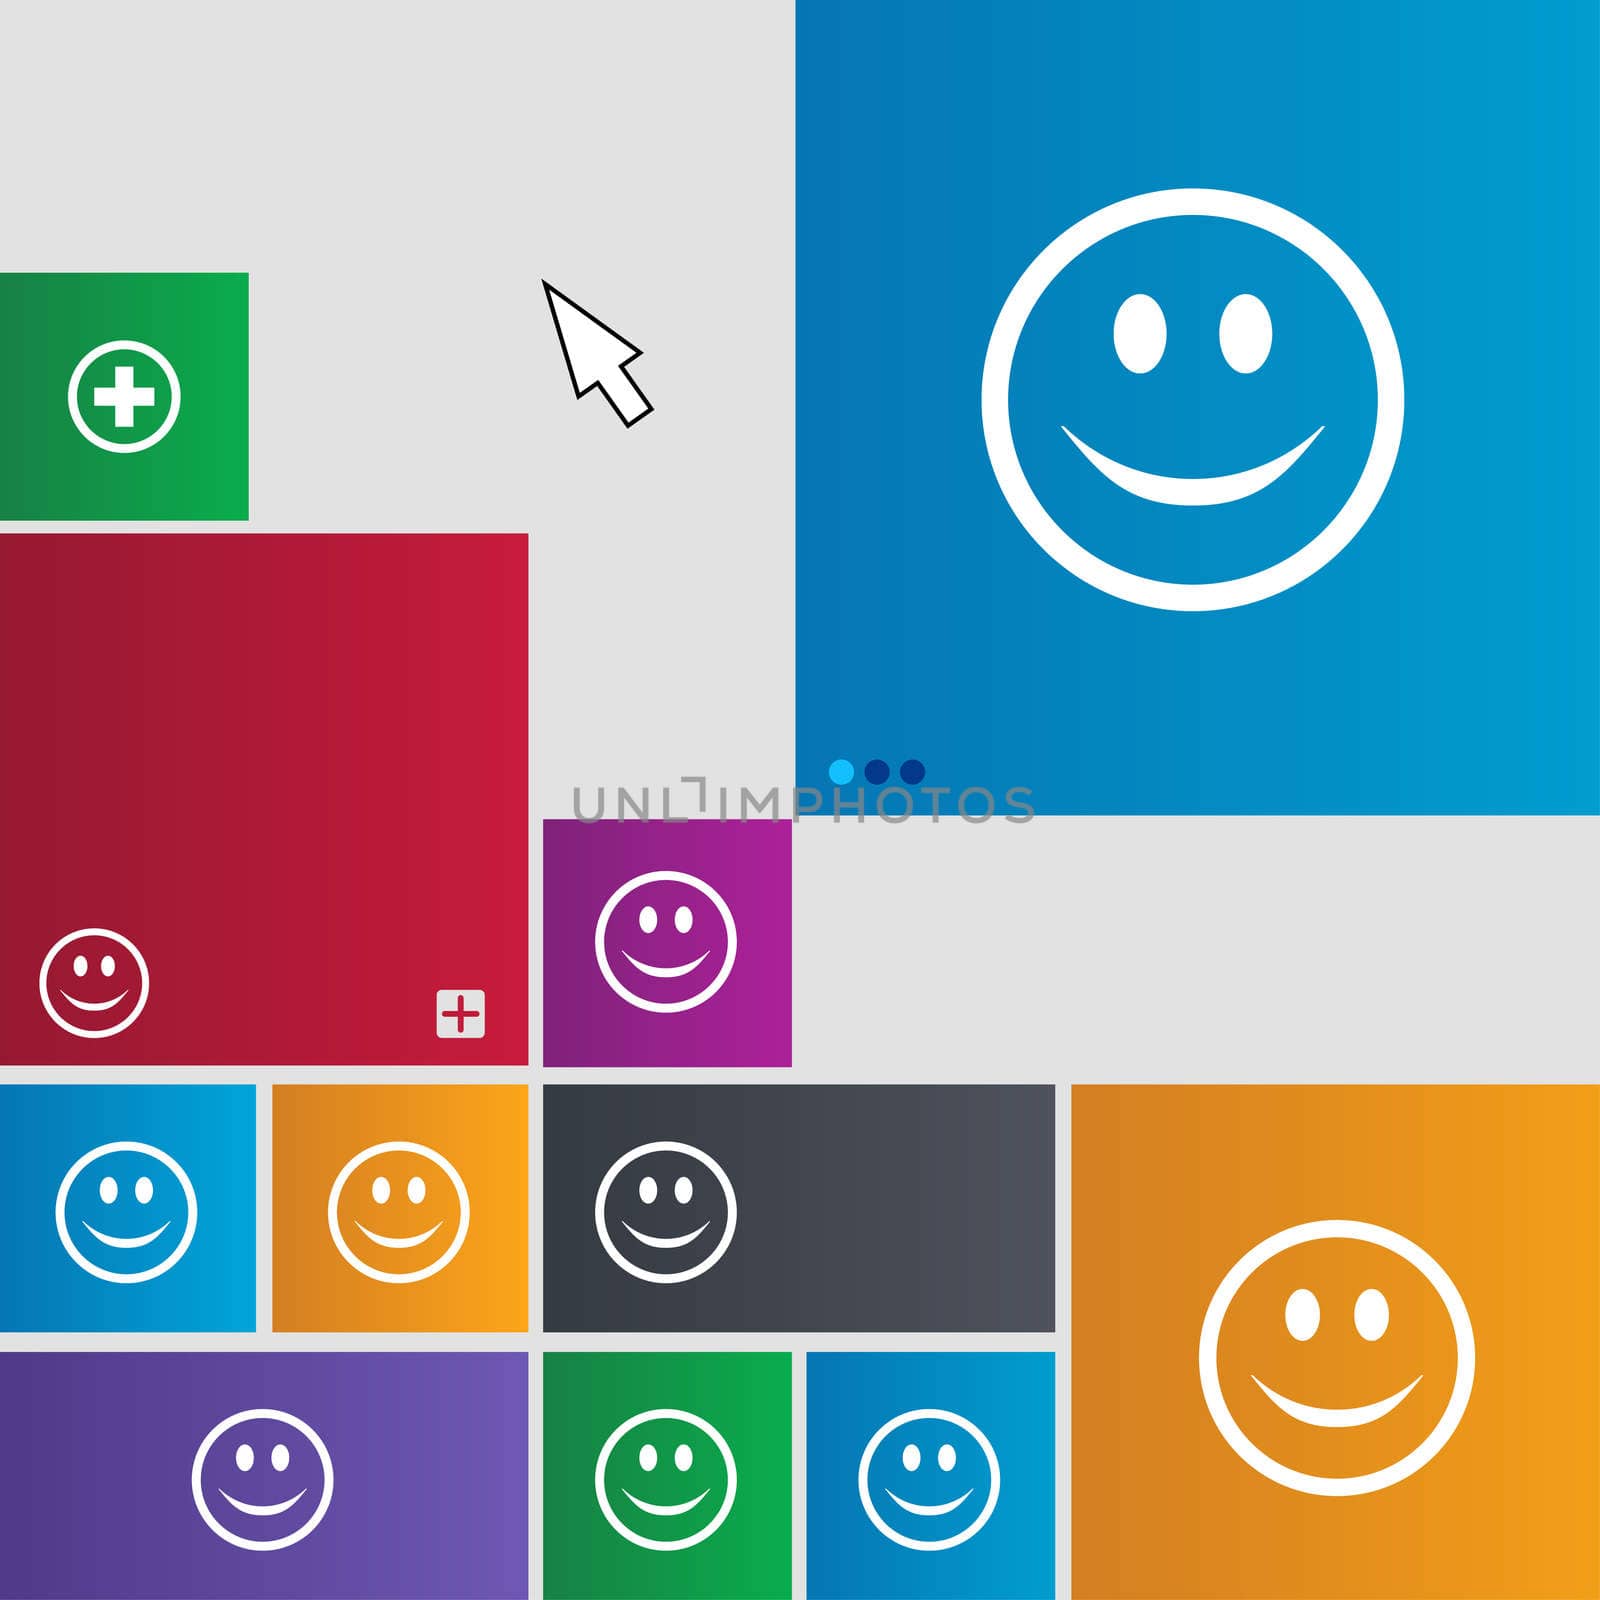 Smile, Happy face icon sign. Metro style buttons. Modern interface website buttons with cursor pointer. illustration